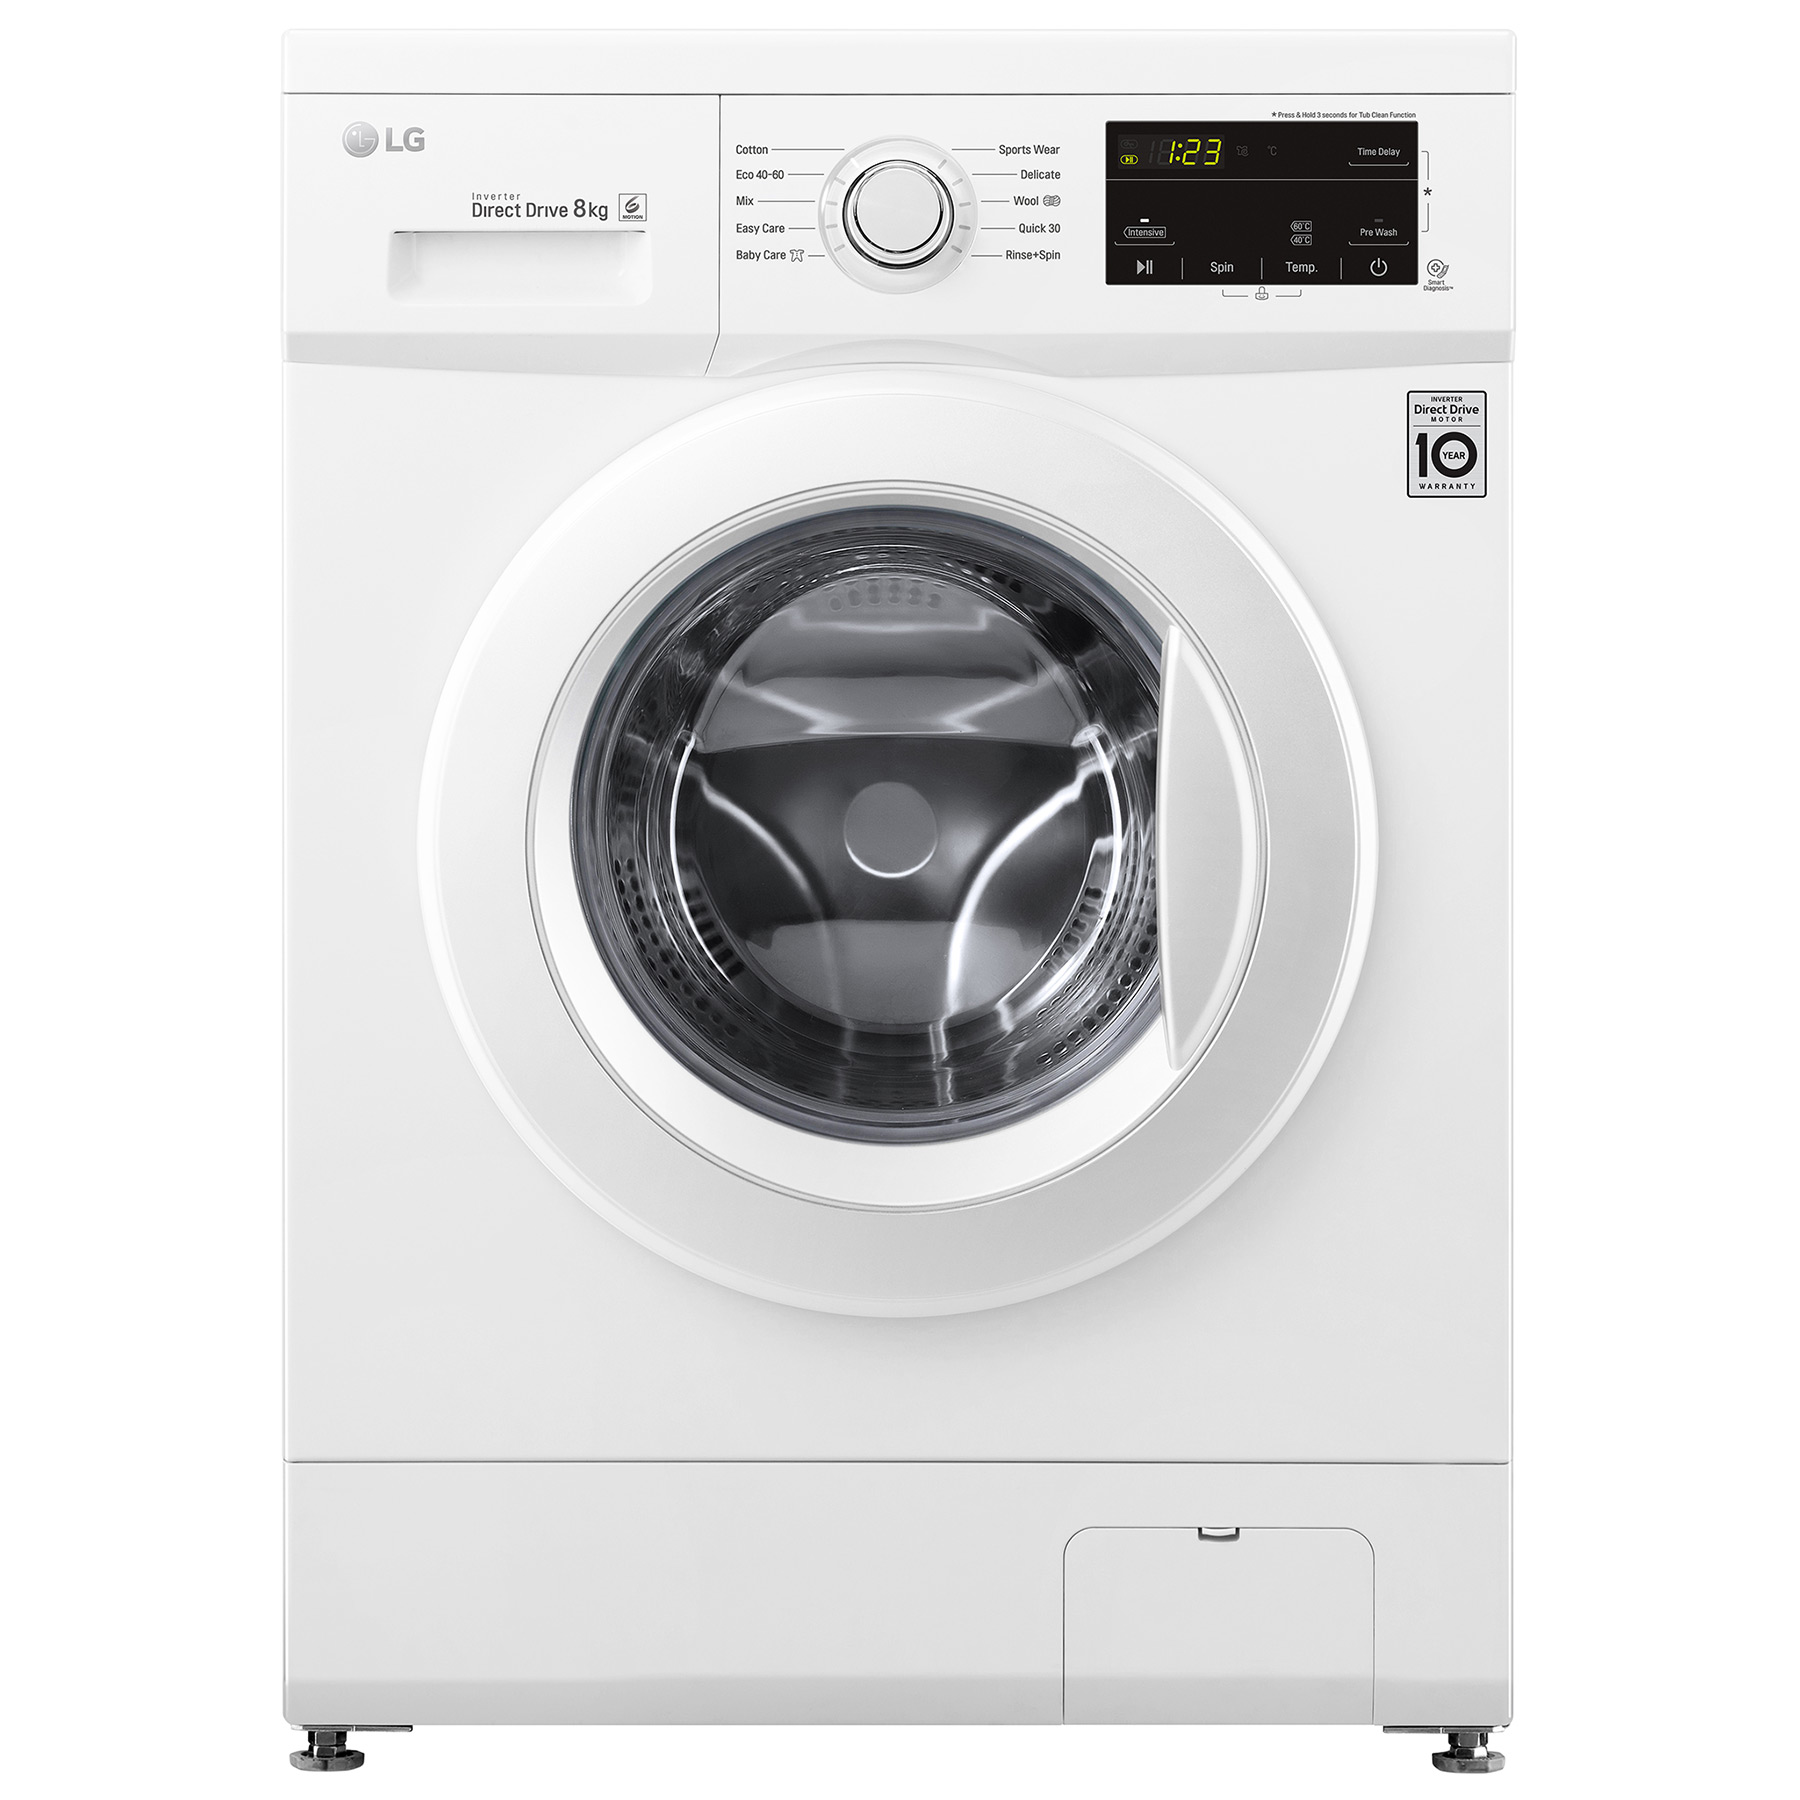 LG F4MT08WE Washing Machine in White 1400rpm 8kg D Rated